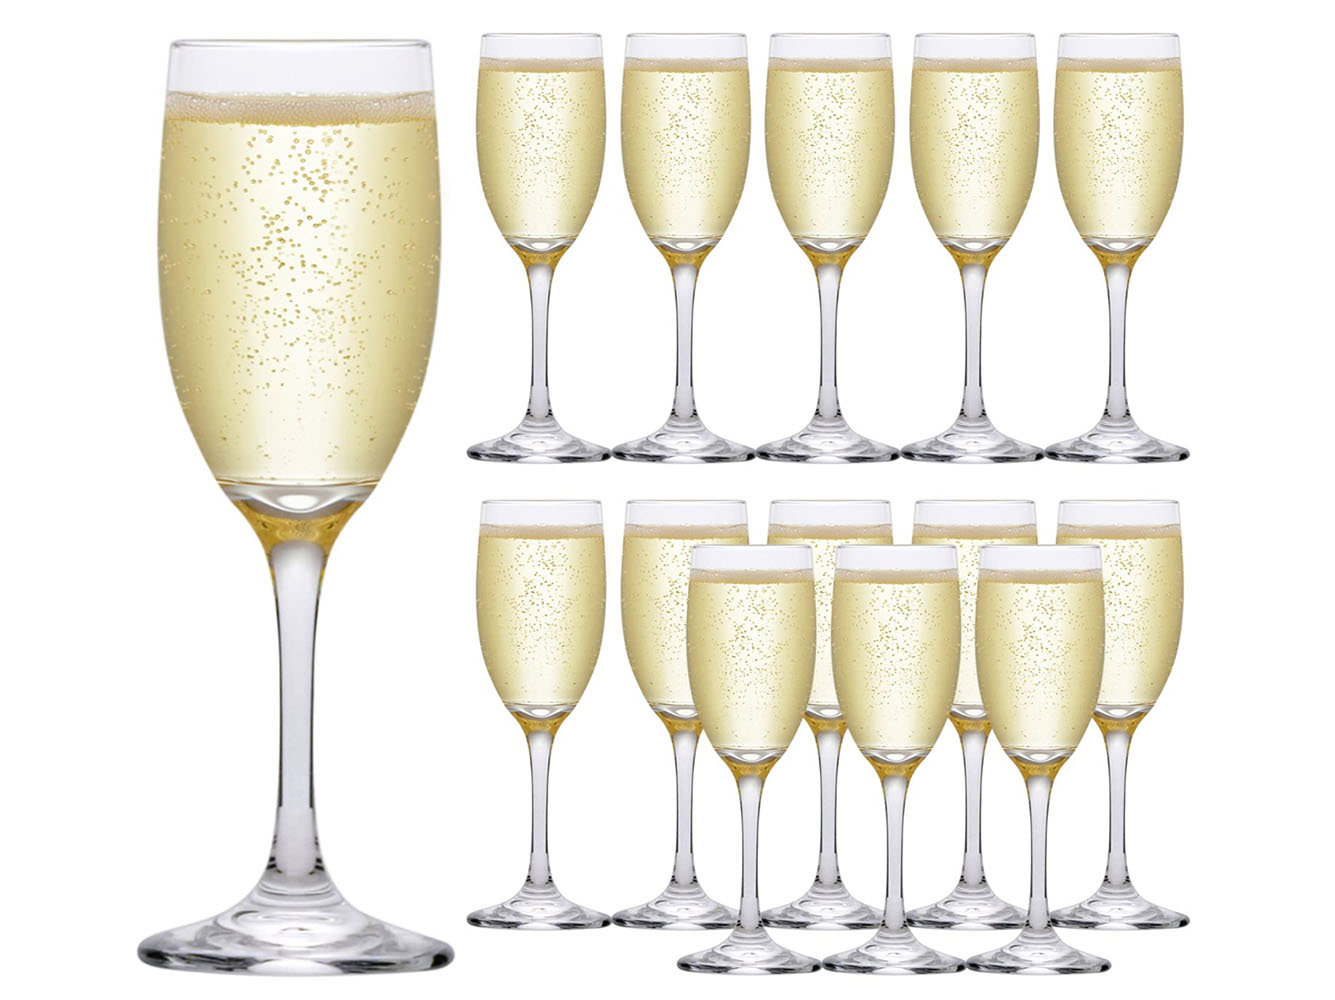 12 pc 4.7 oz. Clear Tall Champagne Flutes - Disposable Tableware